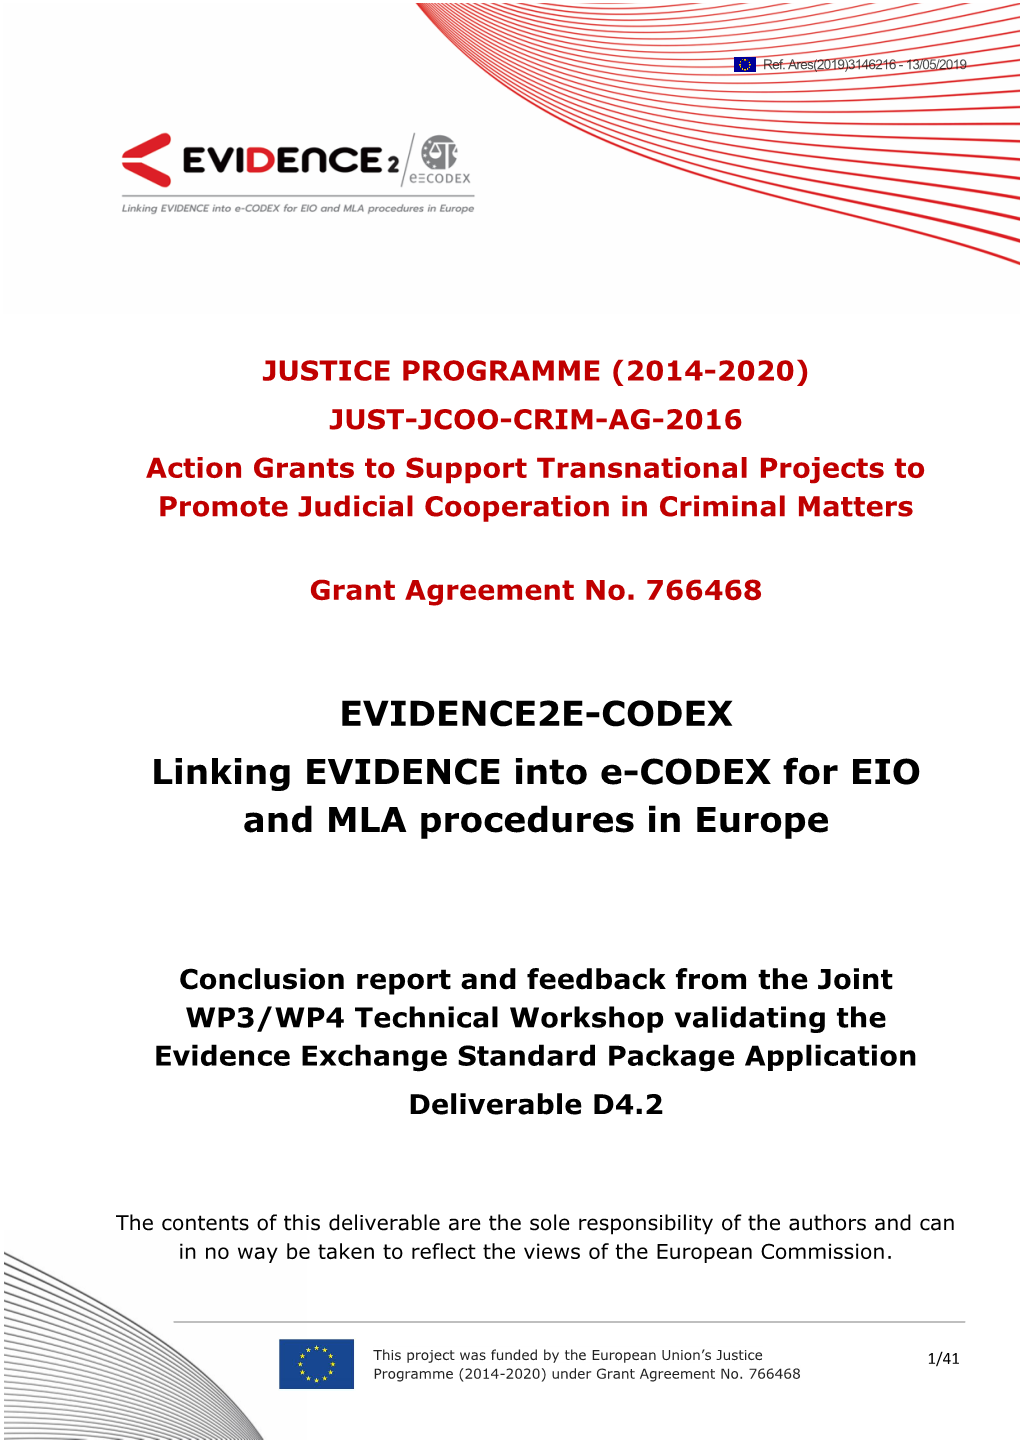 EVIDENCE2E-CODEX Linking EVIDENCE Into E-CODEX for EIO and MLA Procedures in Europe